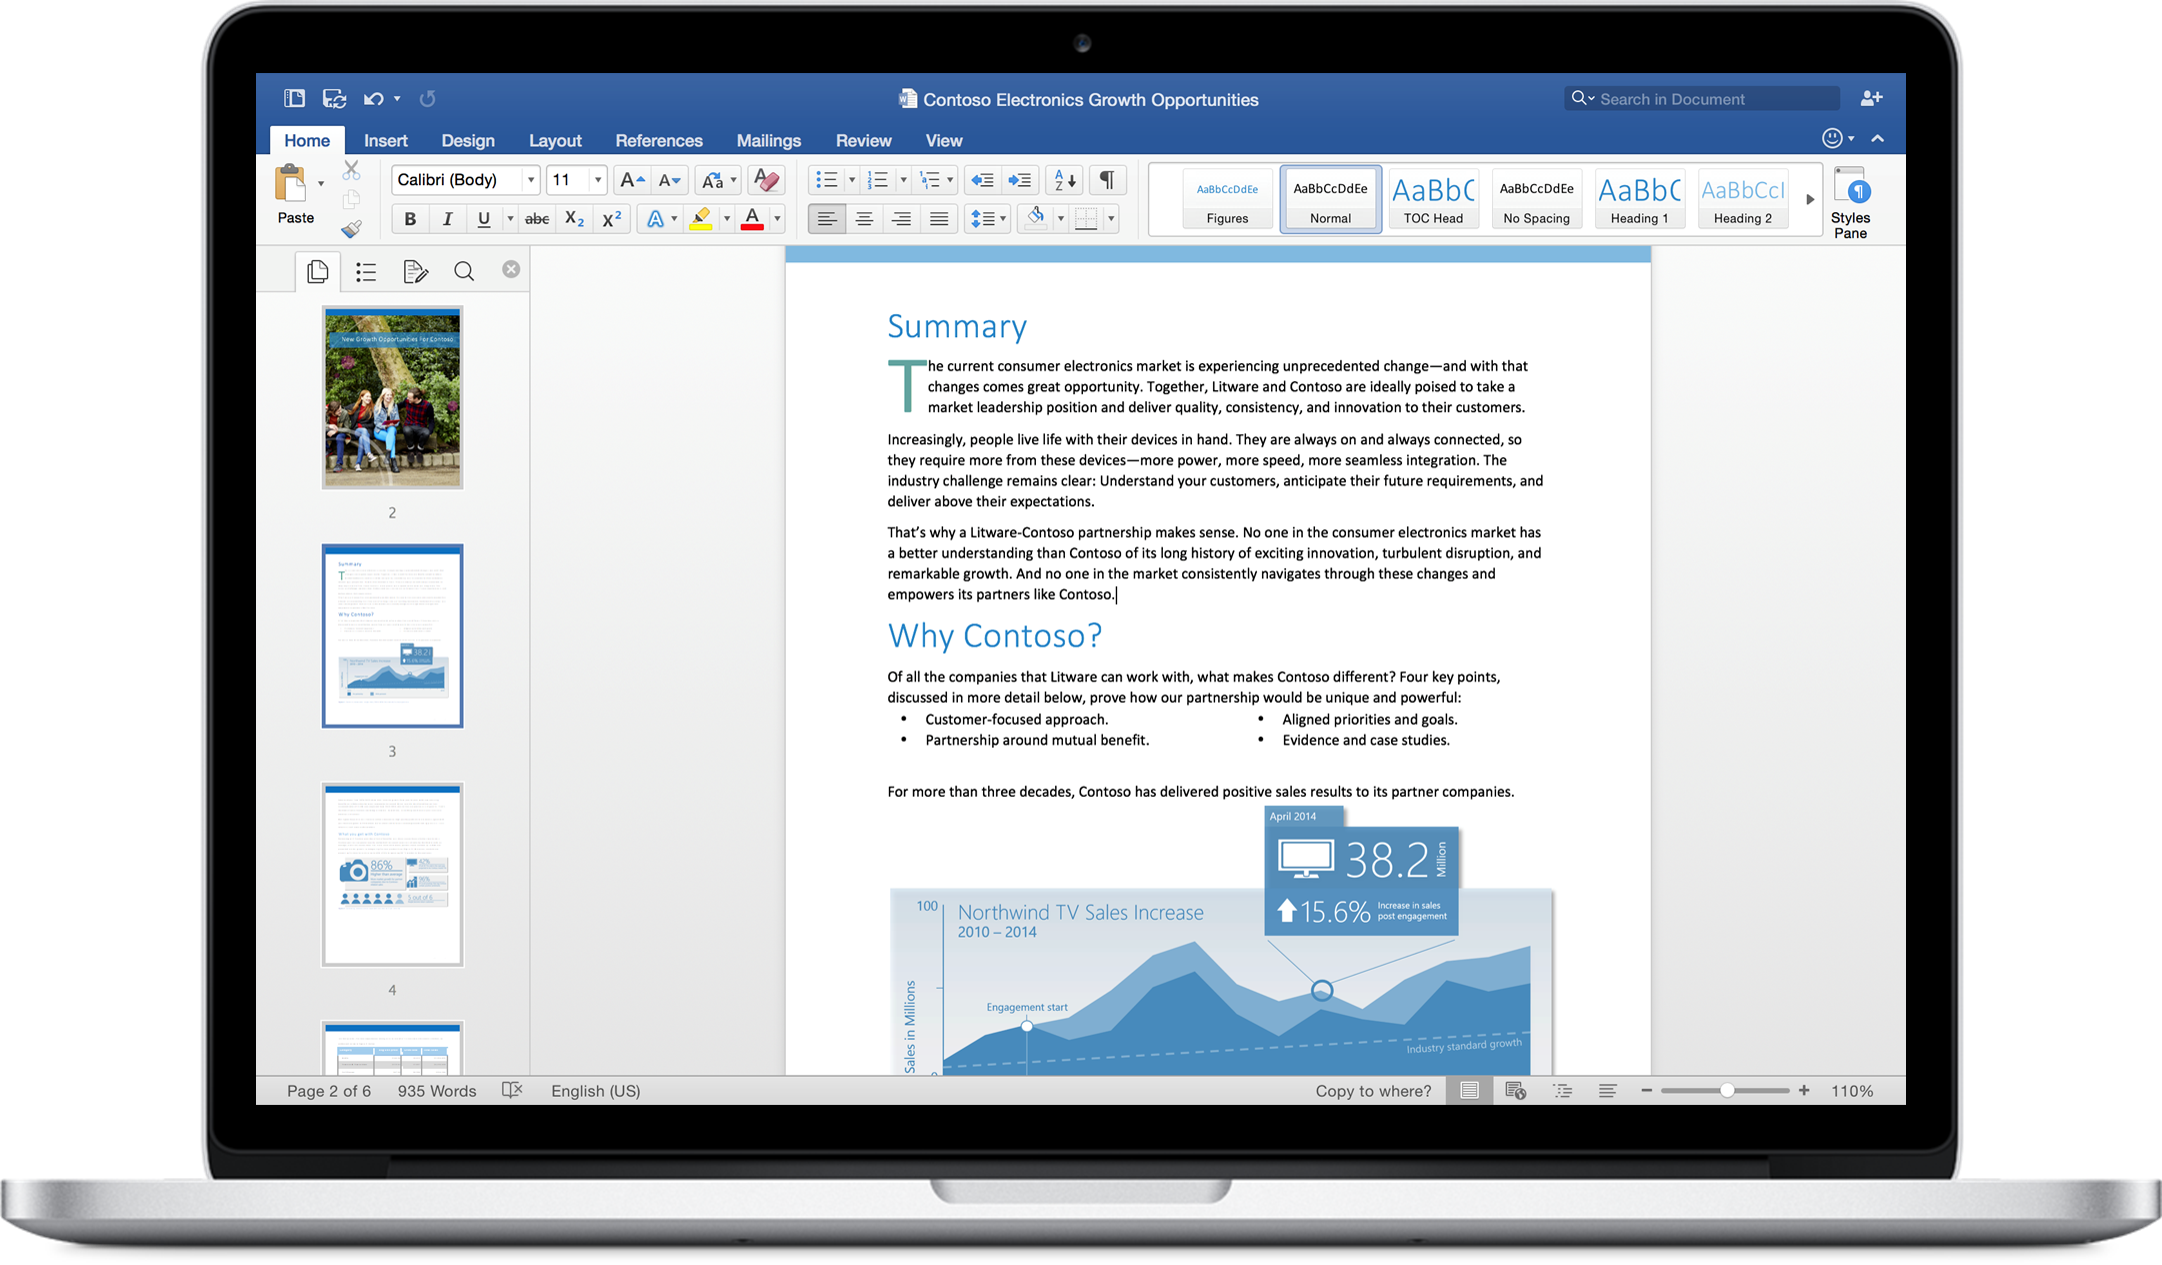 Outlook office 2016 for macbook air